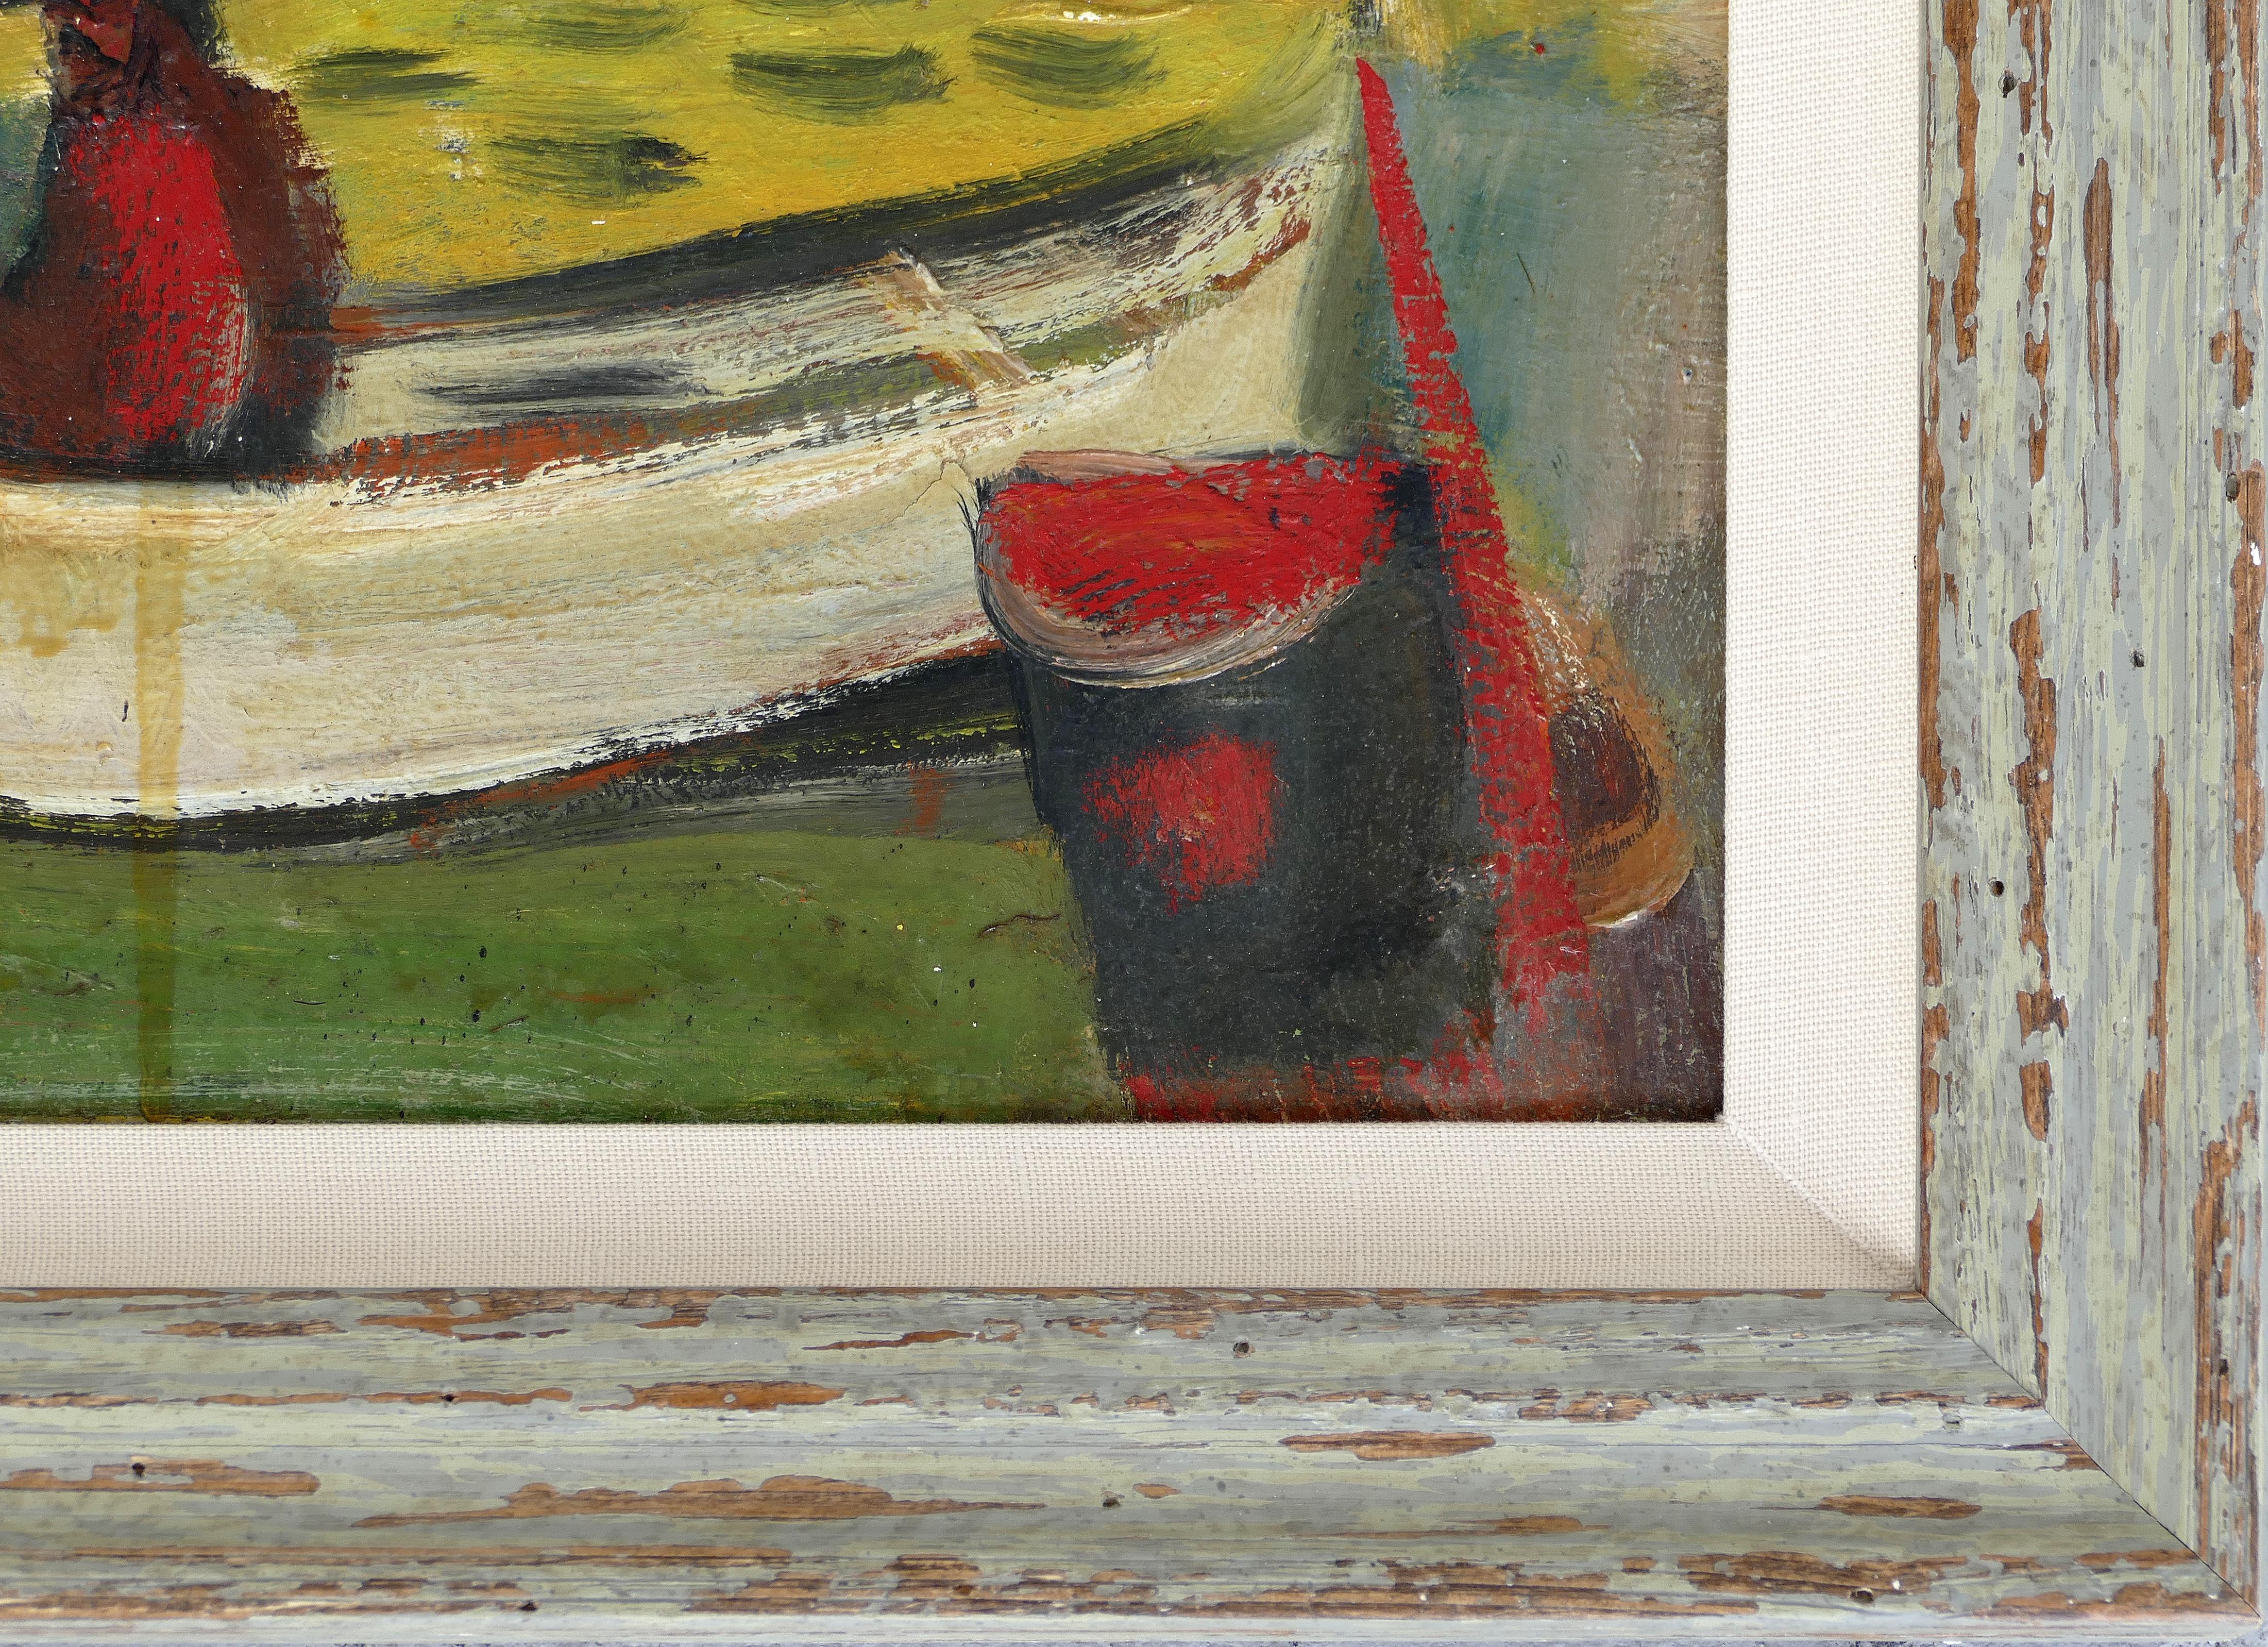 1960 WPA style fishing boatyard oil painting

Offered is a 1960 WPA style boatyard oil painting on panel executed with bold brushwork in an evocative composition. The painting has recently been reframed with cerused wood and a linen liner. The